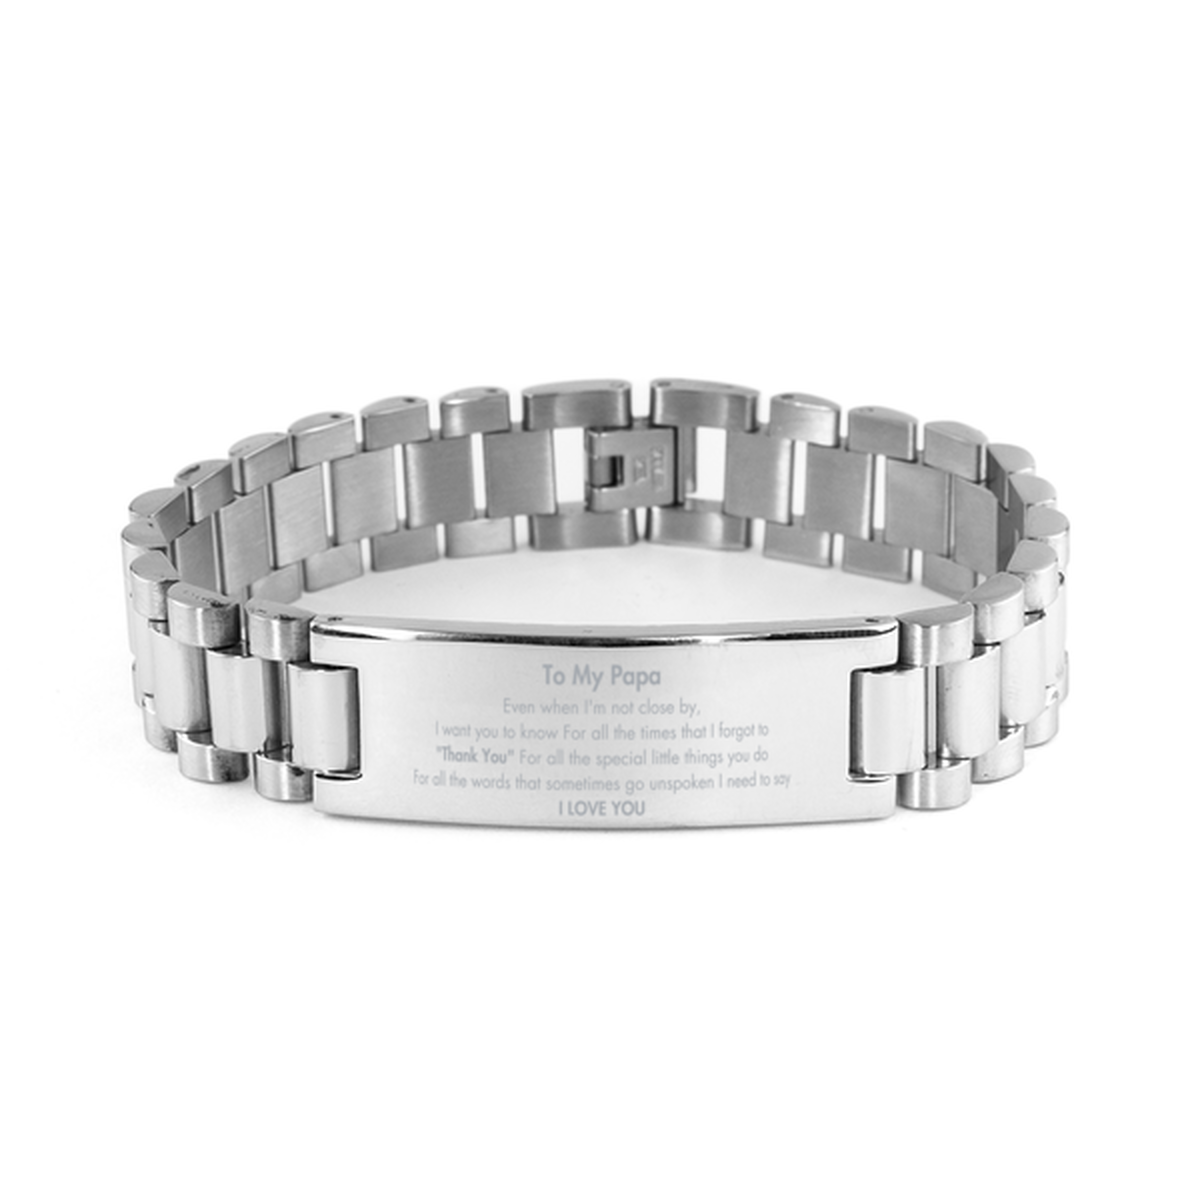 Thank You Gifts for Papa, Keepsake Ladder Stainless Steel Bracelet Gifts for Papa Birthday Mother's day Father's Day Papa For all the words That sometimes go unspoken I need to say I LOVE YOU